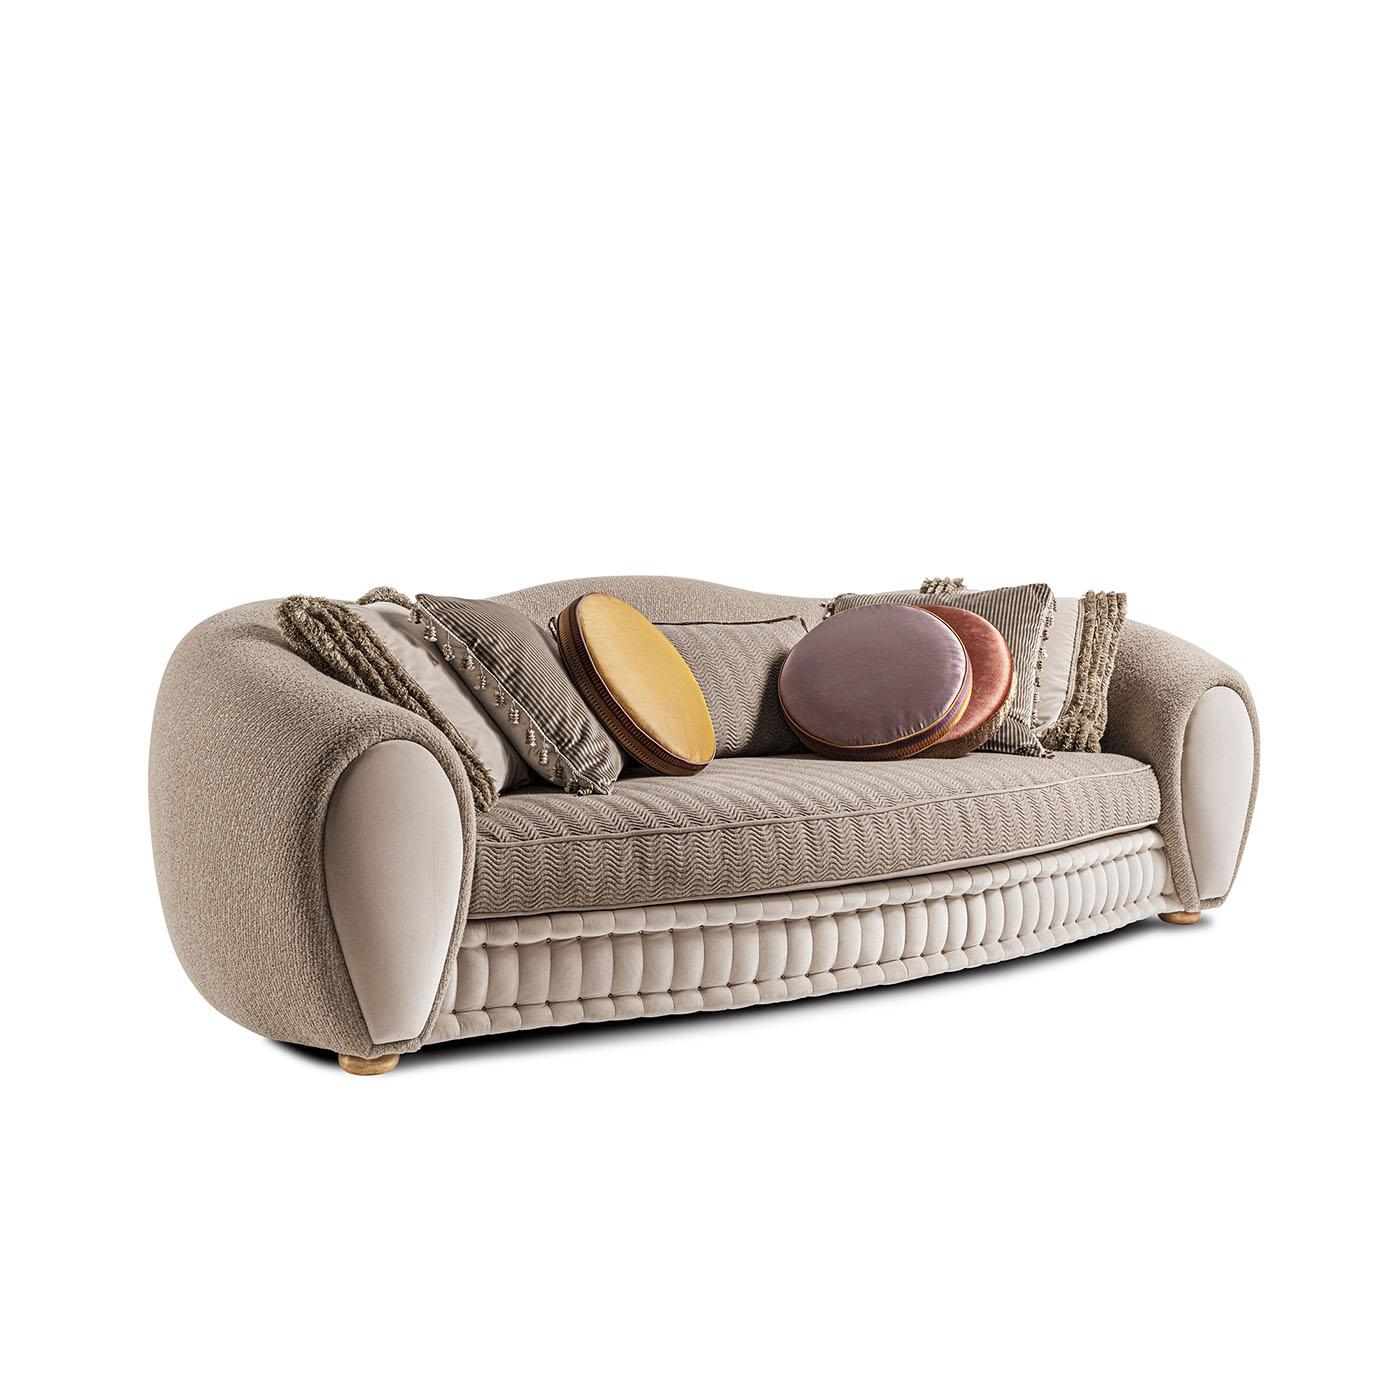 A three-seater sofa with sinuous lines, upholstered in jacquard fabrics, it is complemented by decorative cushions and enriched with precious velvet details. The Tigran sofa offers comfort without sacrificing design and craftsmanship.